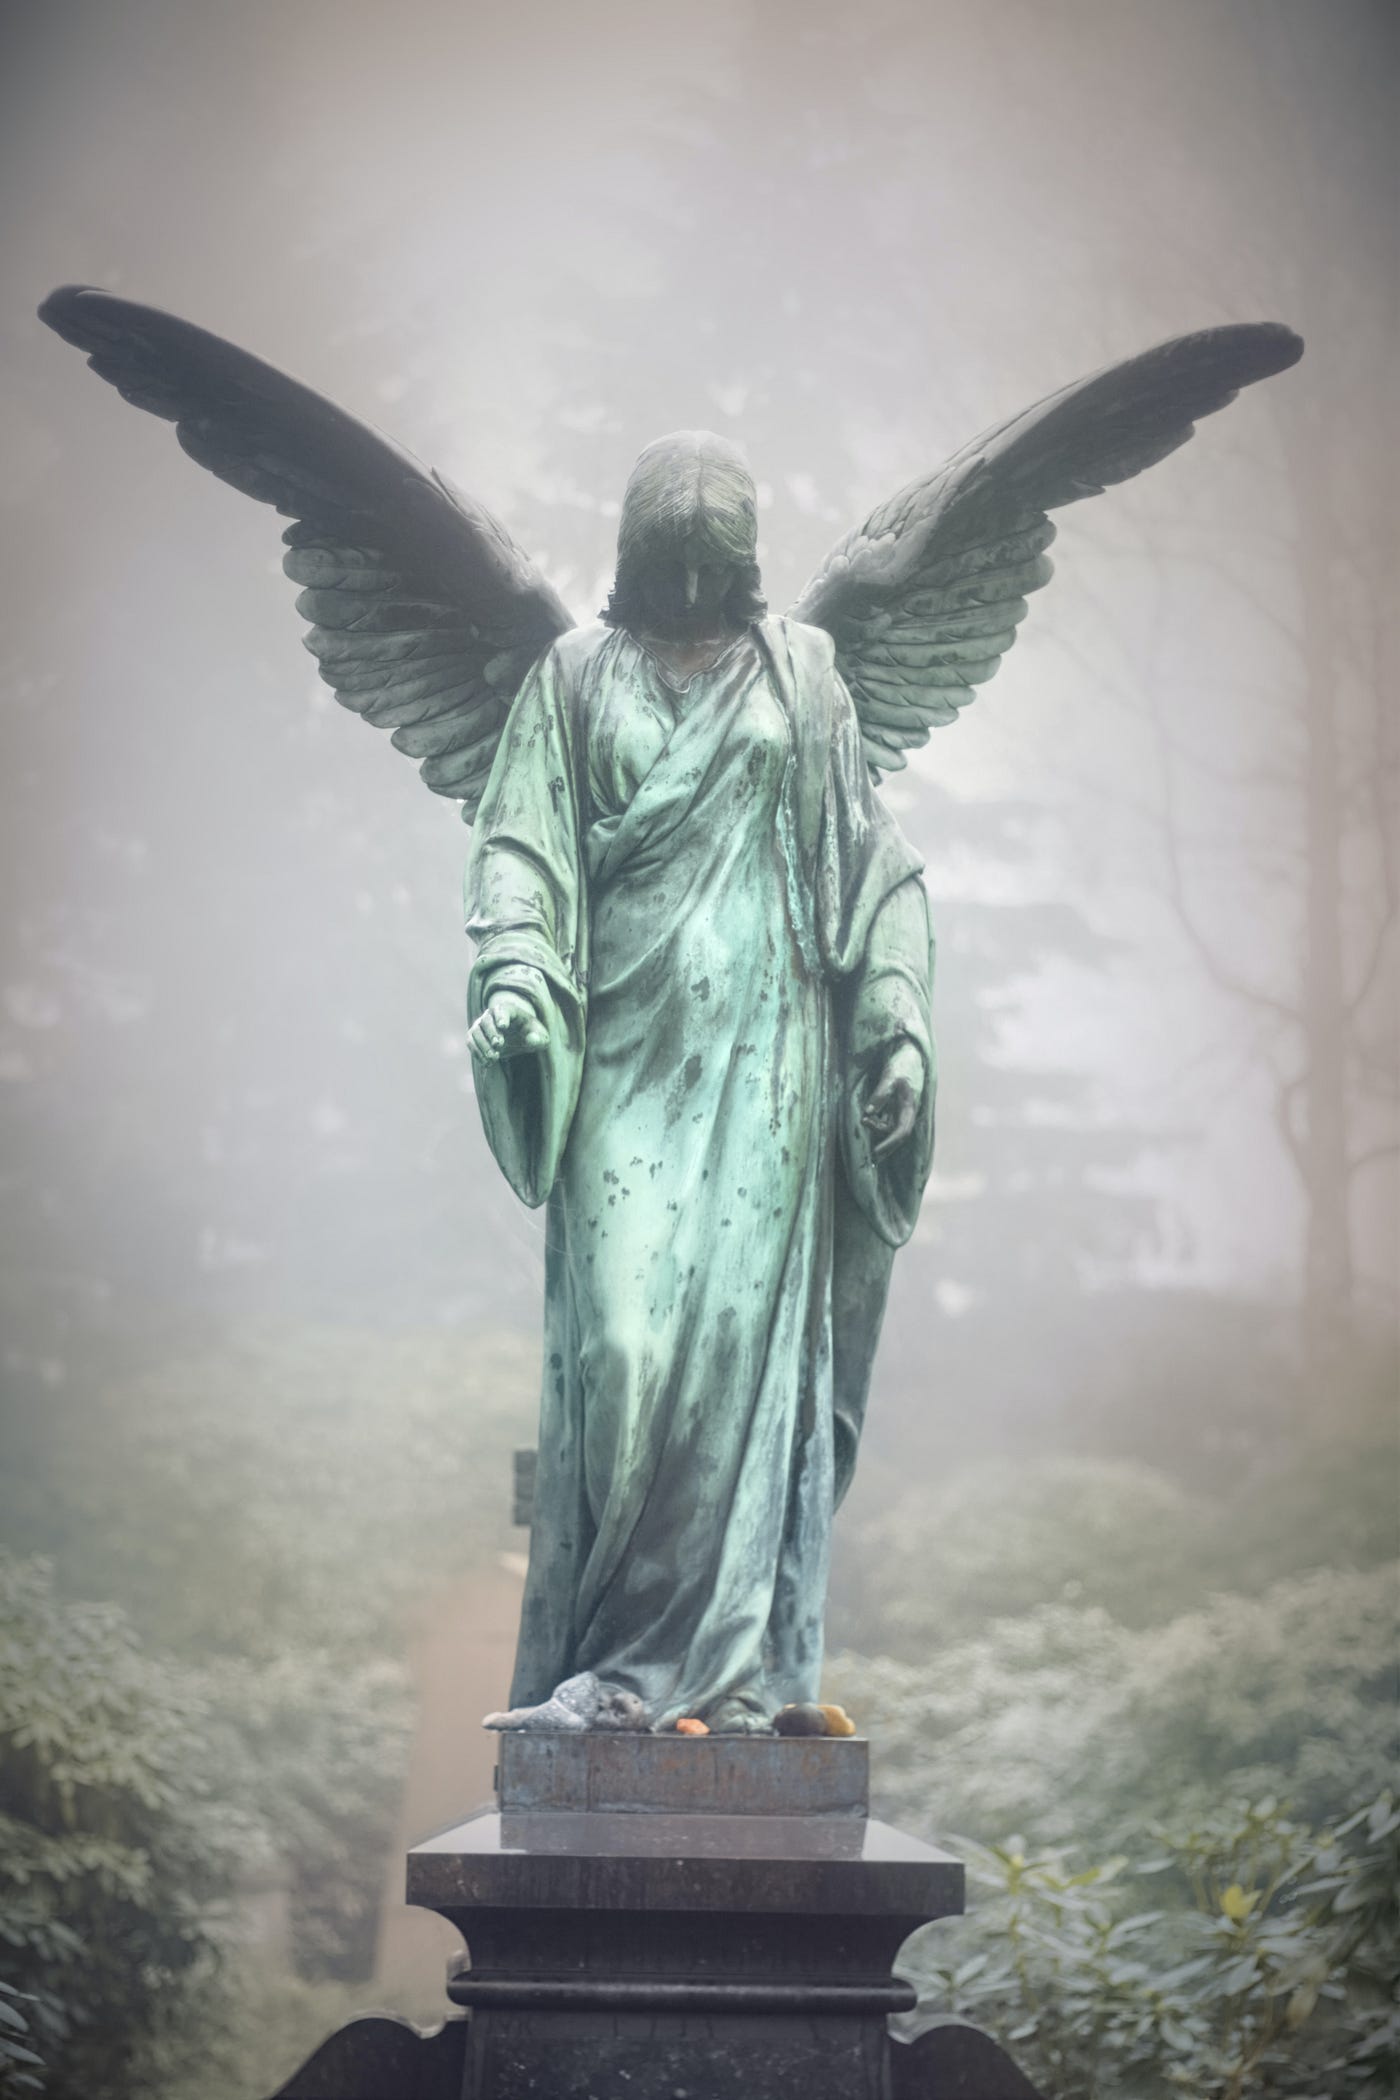 Deathbed Visions of Angels in the Afterlife